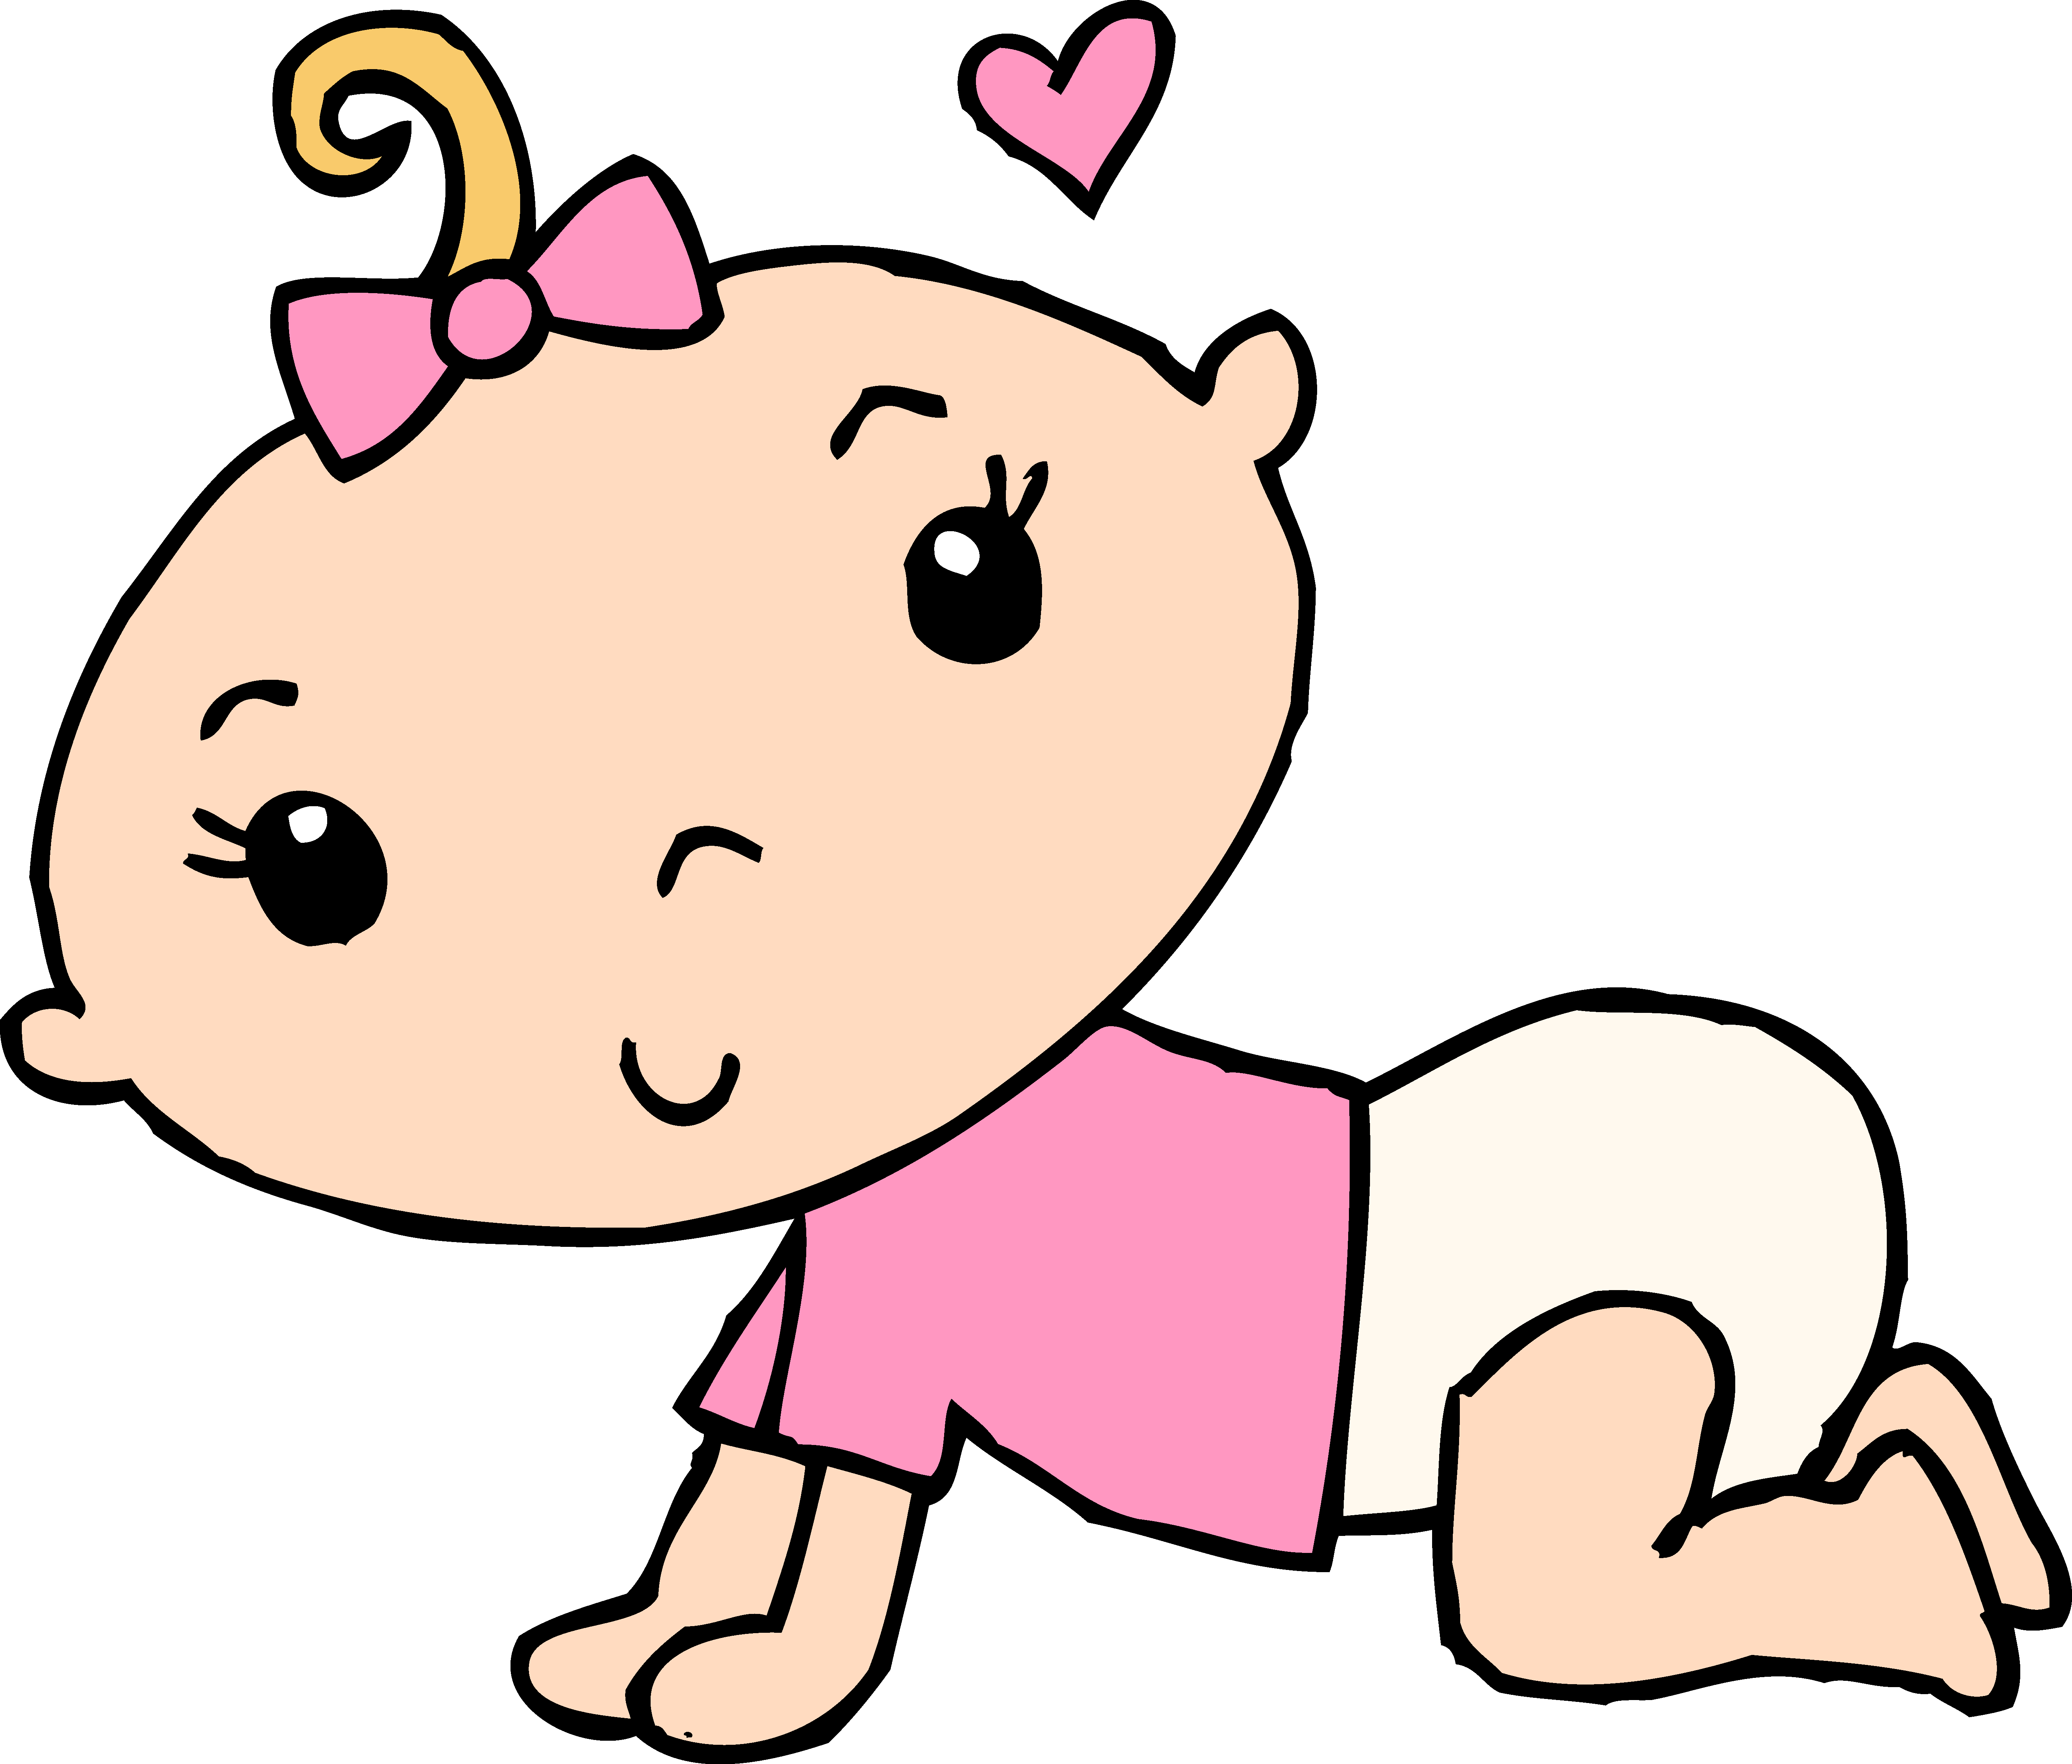 Free Baby Cliparts, Download Free Clip Art, Free Clip Art on